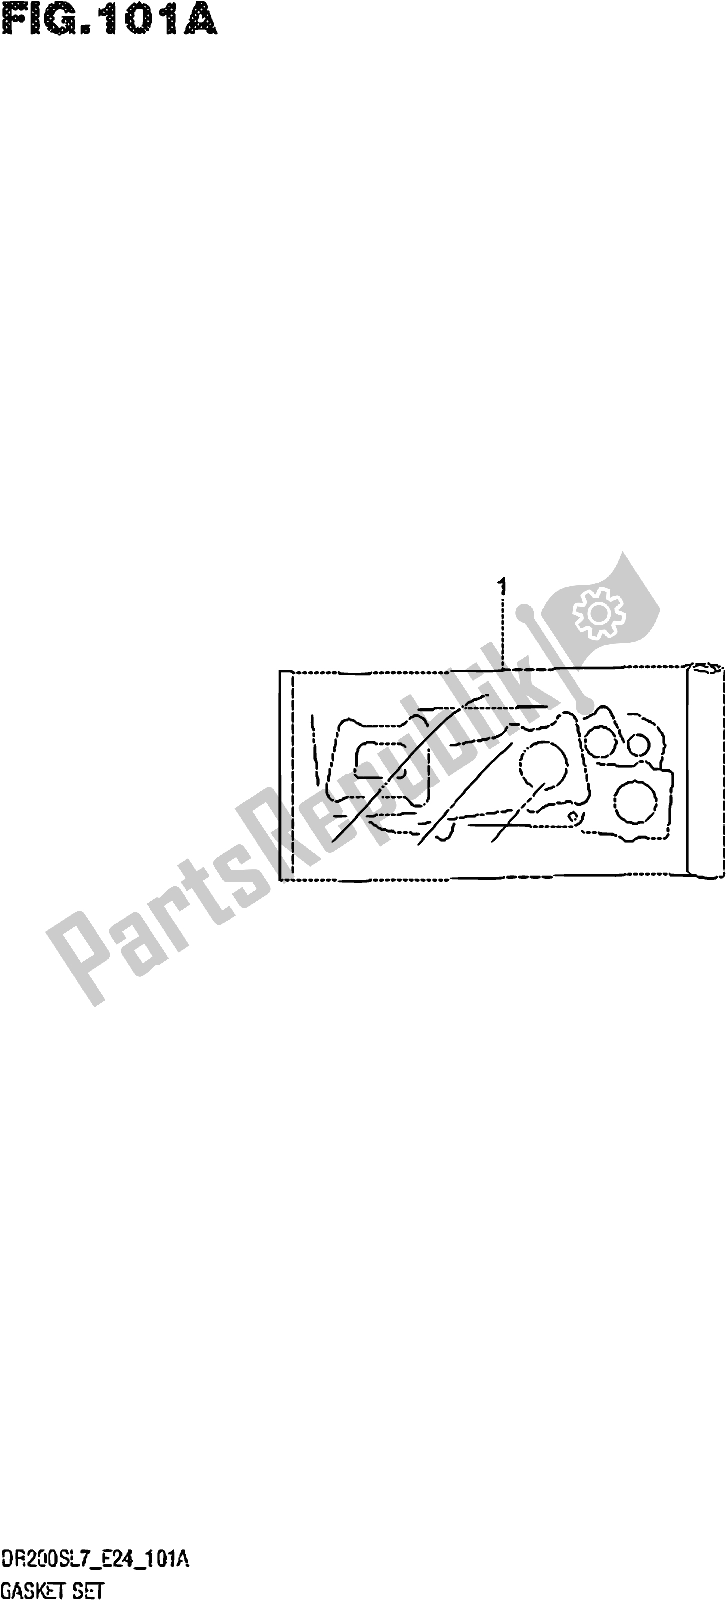 All parts for the Fig. 101a Gasket Set of the Suzuki DR 200S 2017